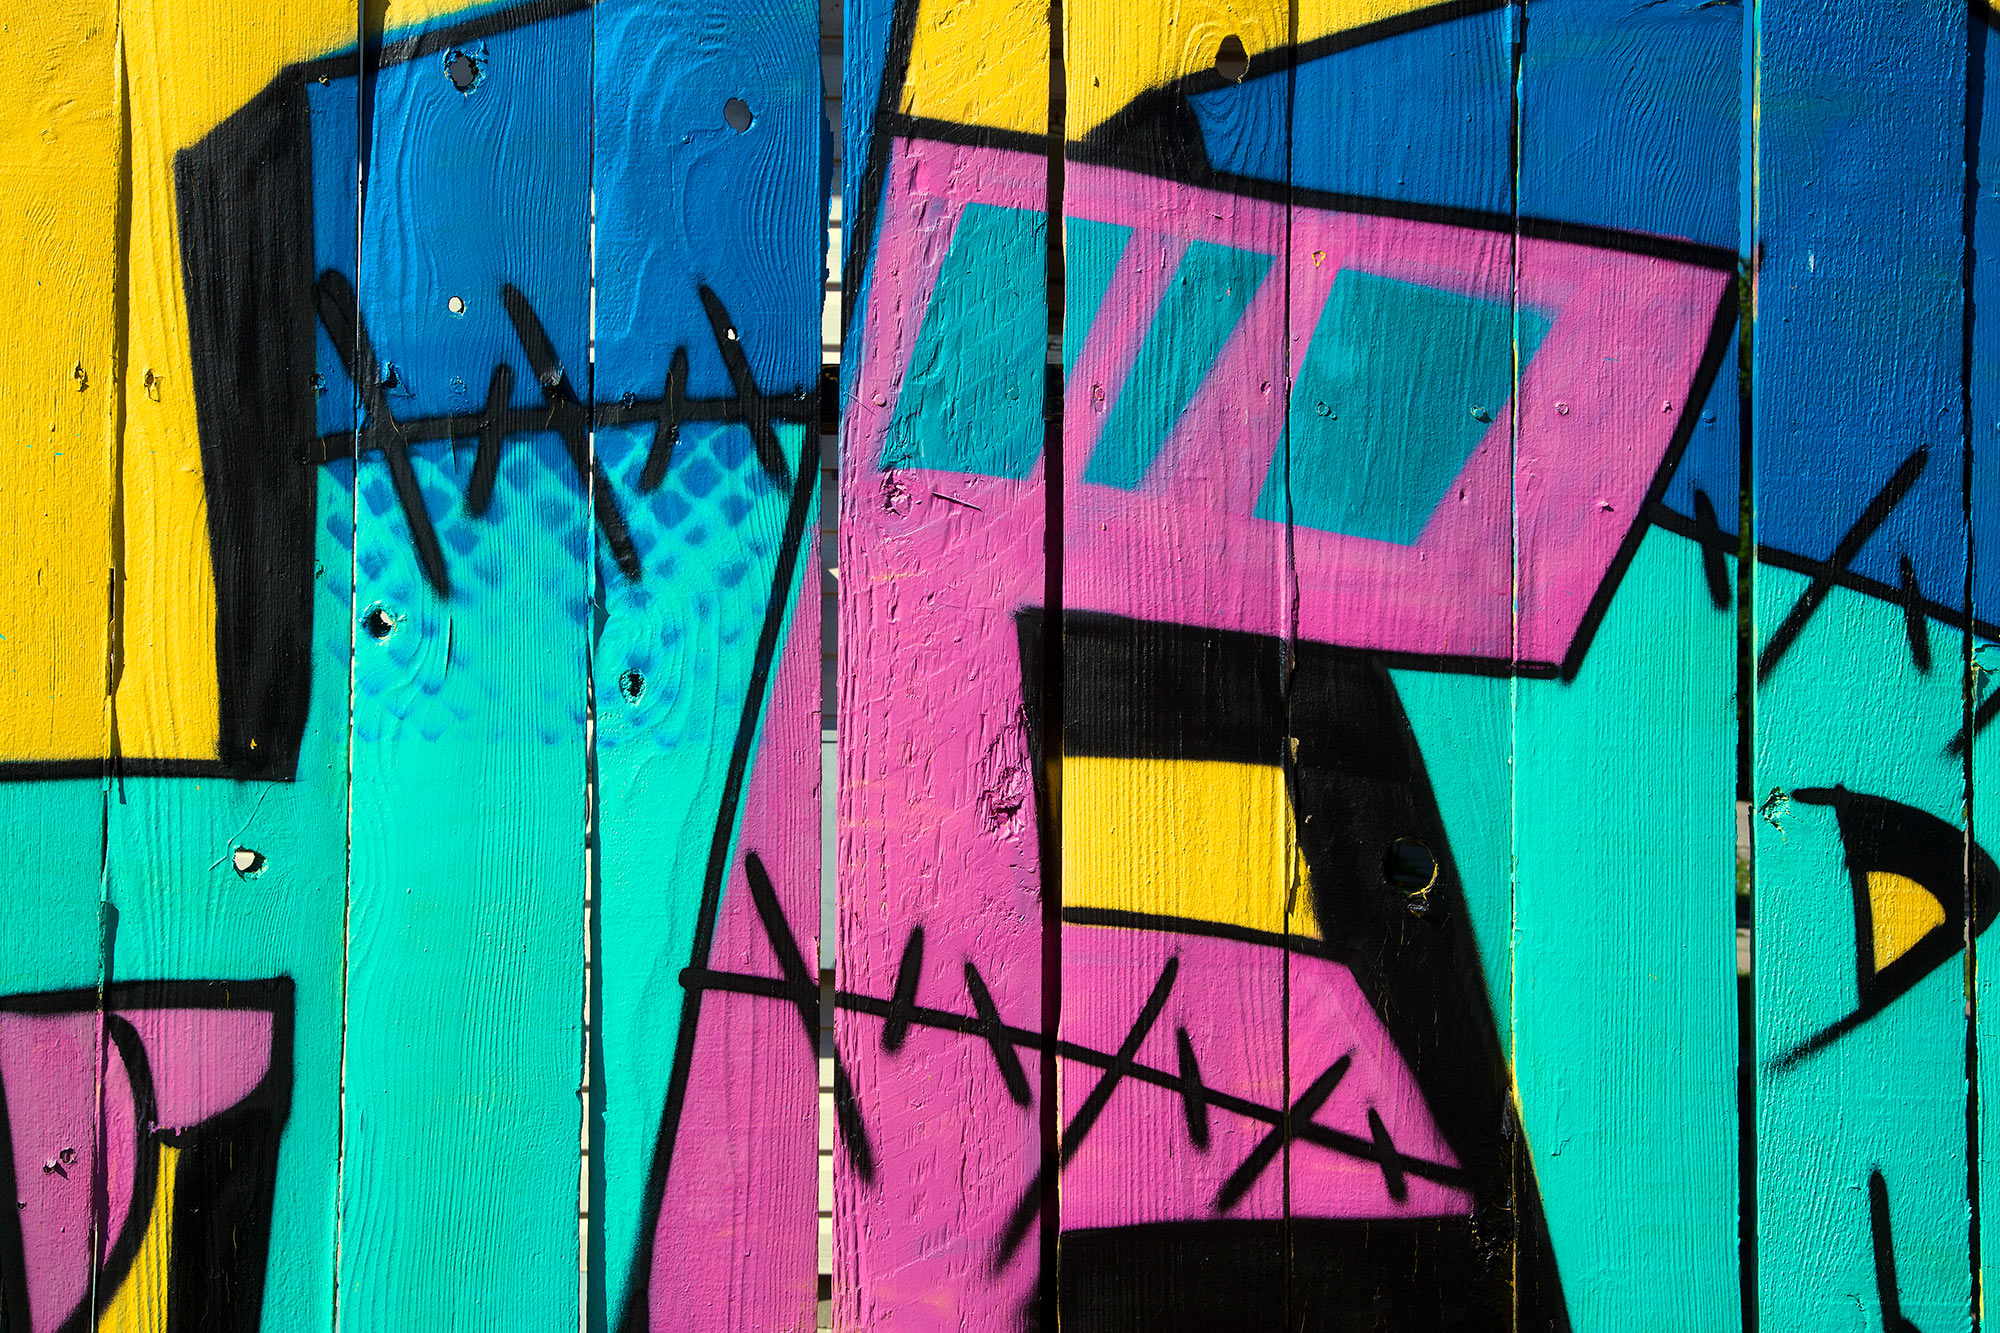 Graffiti in the Eastwood neighborhood of Houston, Texas, photographed by Houston editorial and commercial photographer, Todd Spoth.